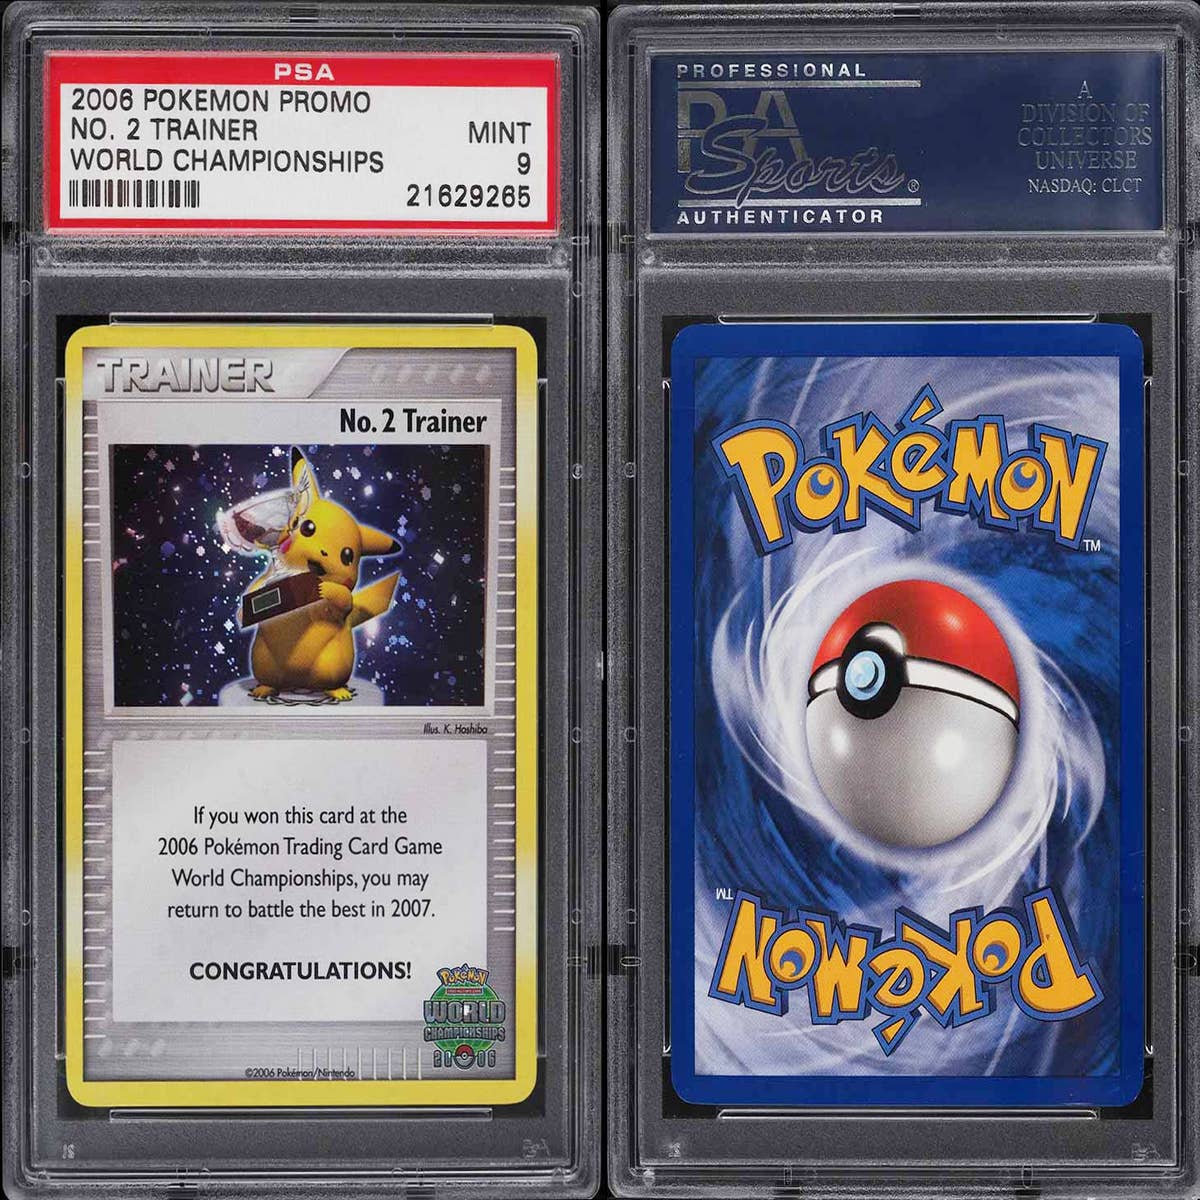 12 Most Valuable Pokemon Cards in the World, Their Prices Are, kangaskhan -  promocional - family event trophy card 